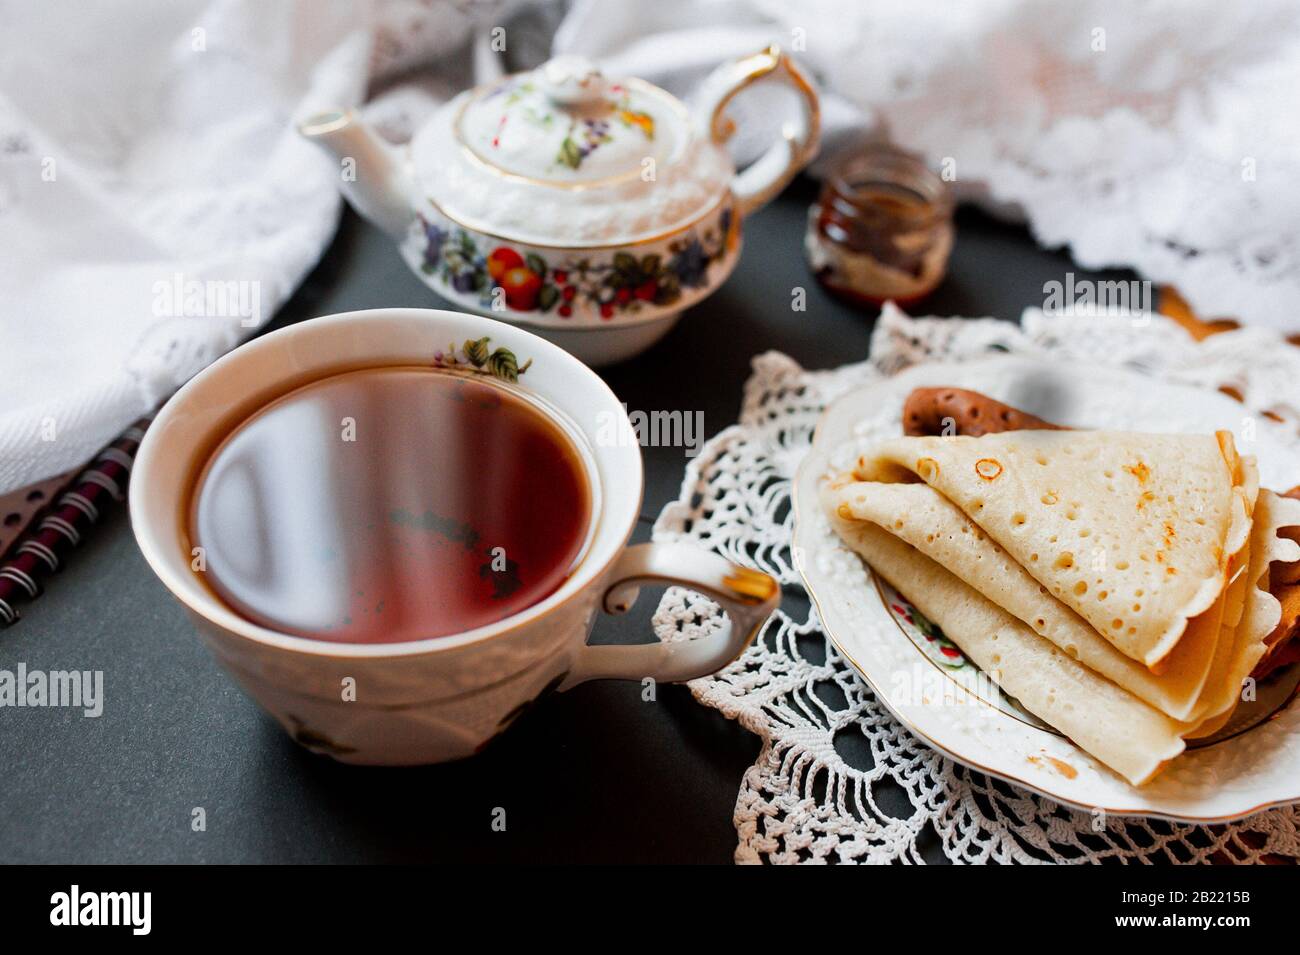 A beautiful version of Breakfast with a white porcelain Cup and a painted teapot in the background, ready-made pancakes on a saucer. Table setting for Stock Photo